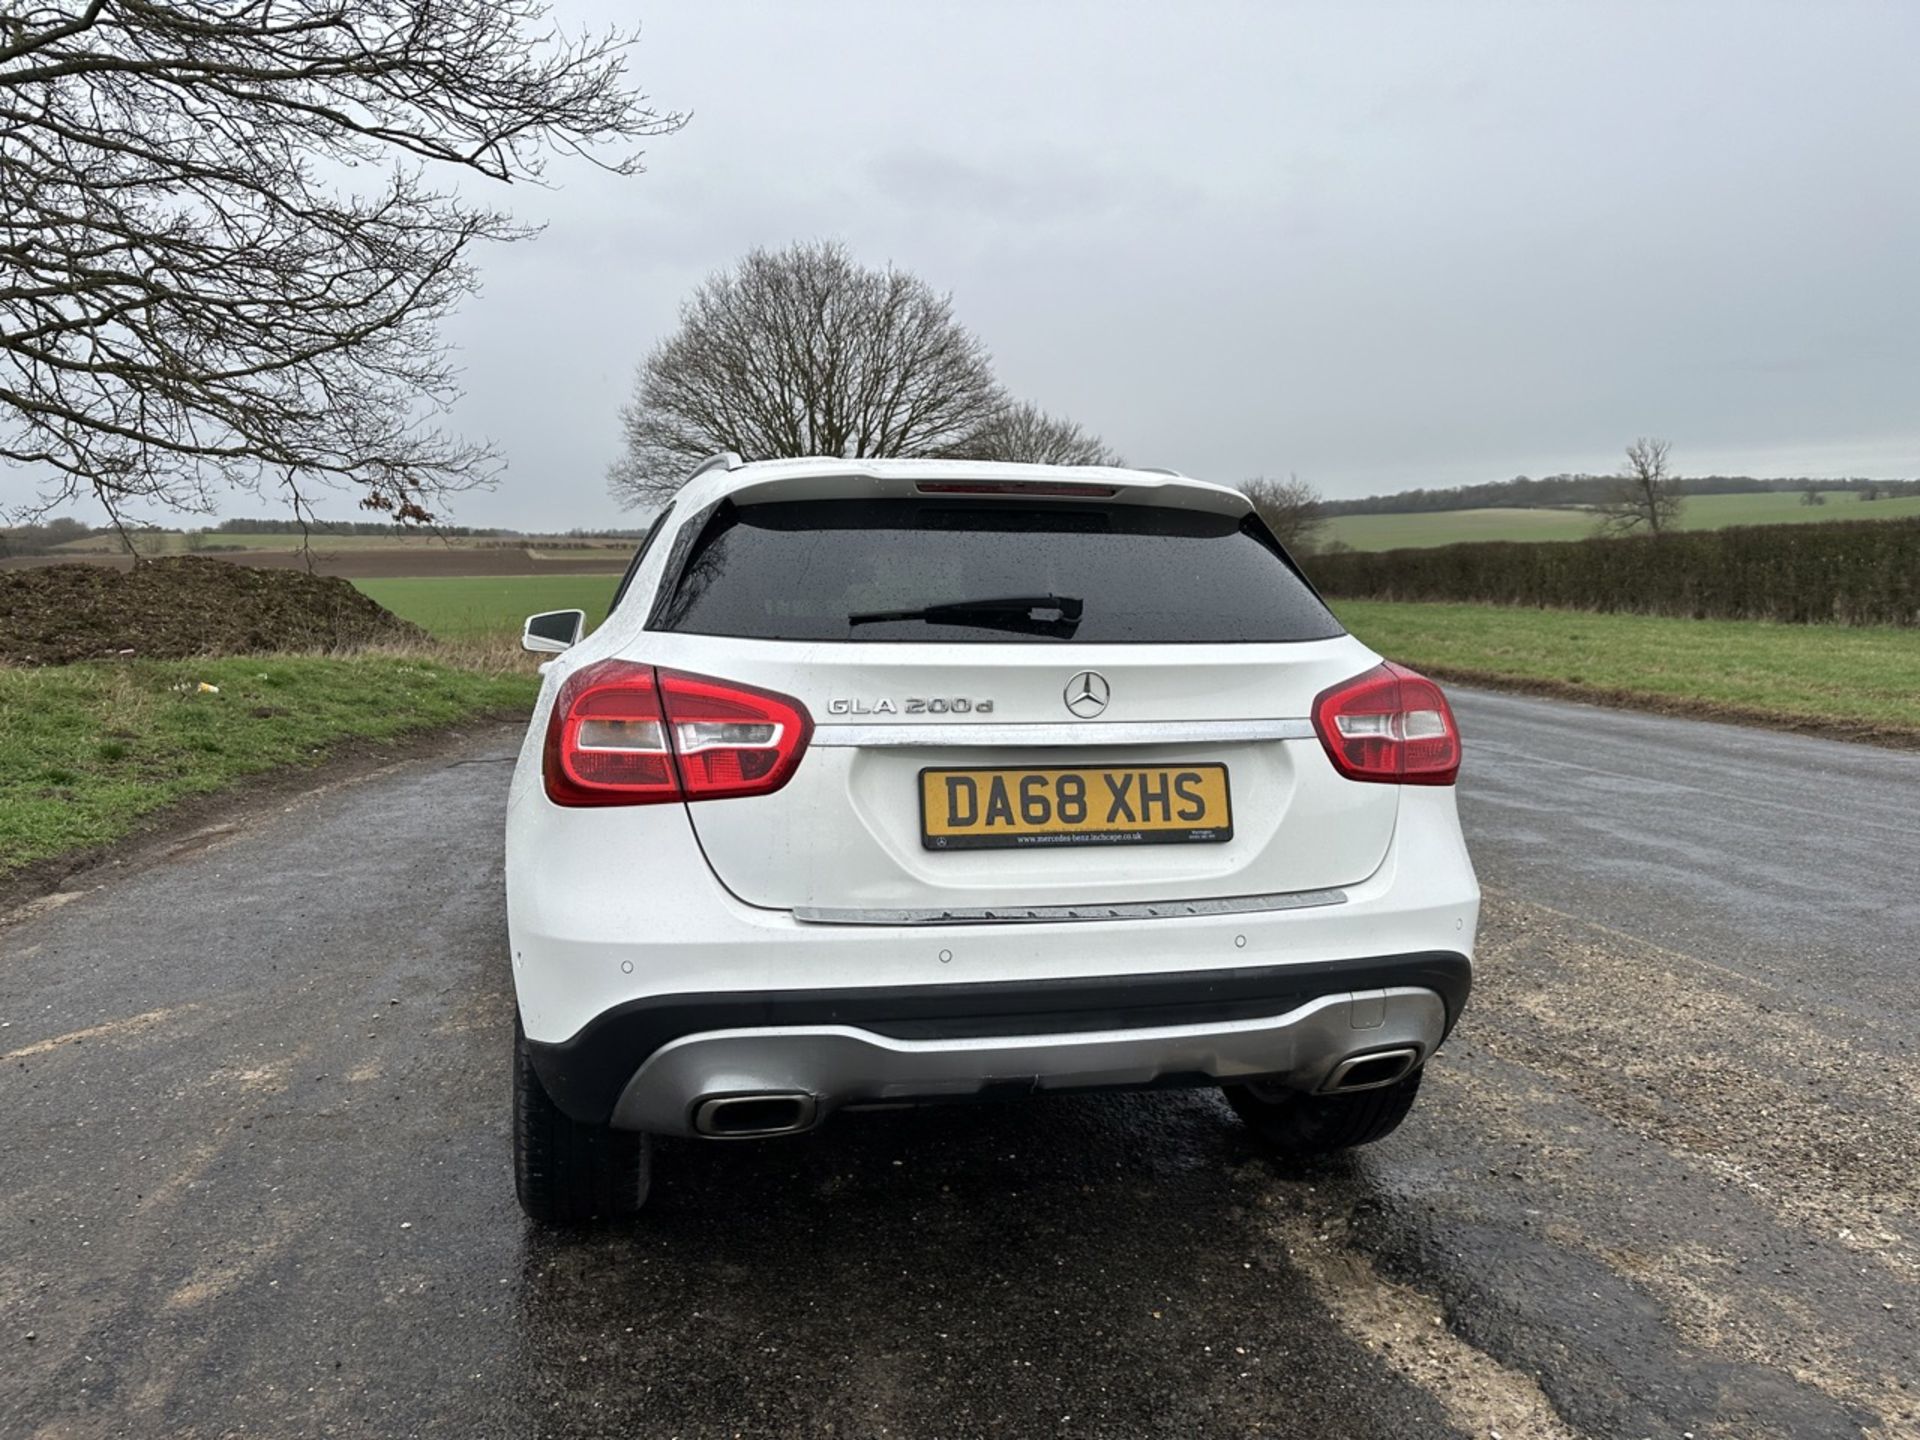 MERCEDES GLA 200d AUTO "SPORT EXECUTIVE" 2019 MODEL - LEATHER - LOW MILES - AIR CON - Image 6 of 17